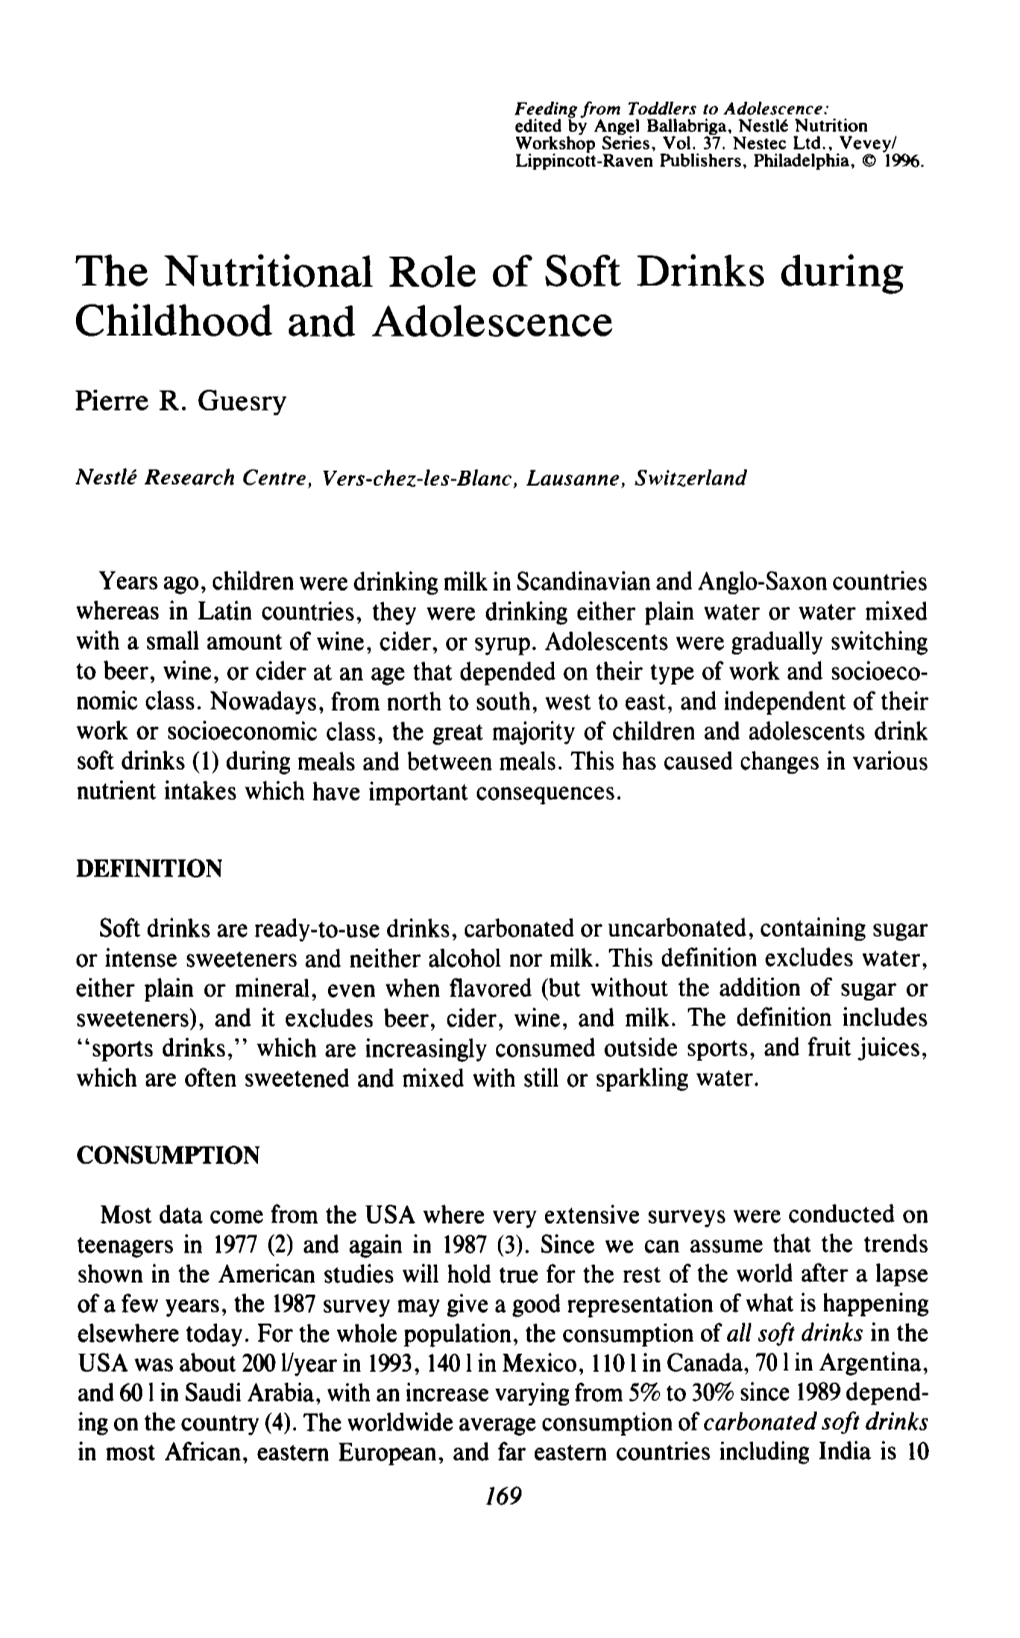 The Nutritional Role of Soft Drinks During Childhood and Adolescence